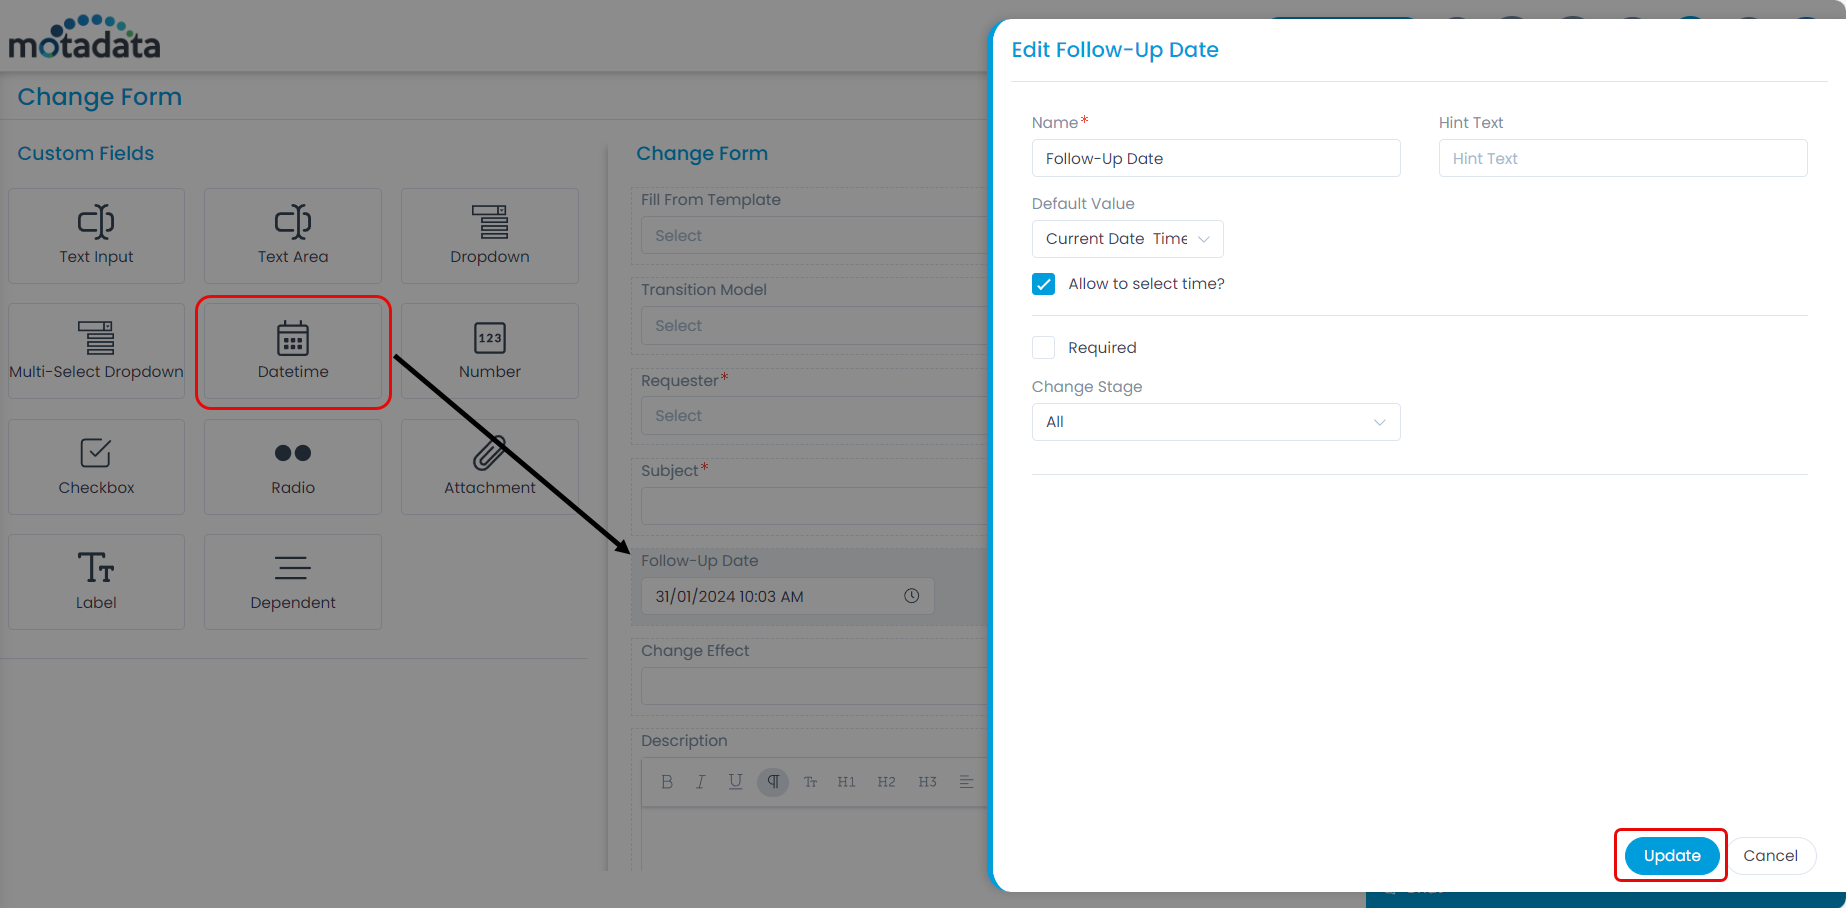 Adding Custom Field in the Change Form